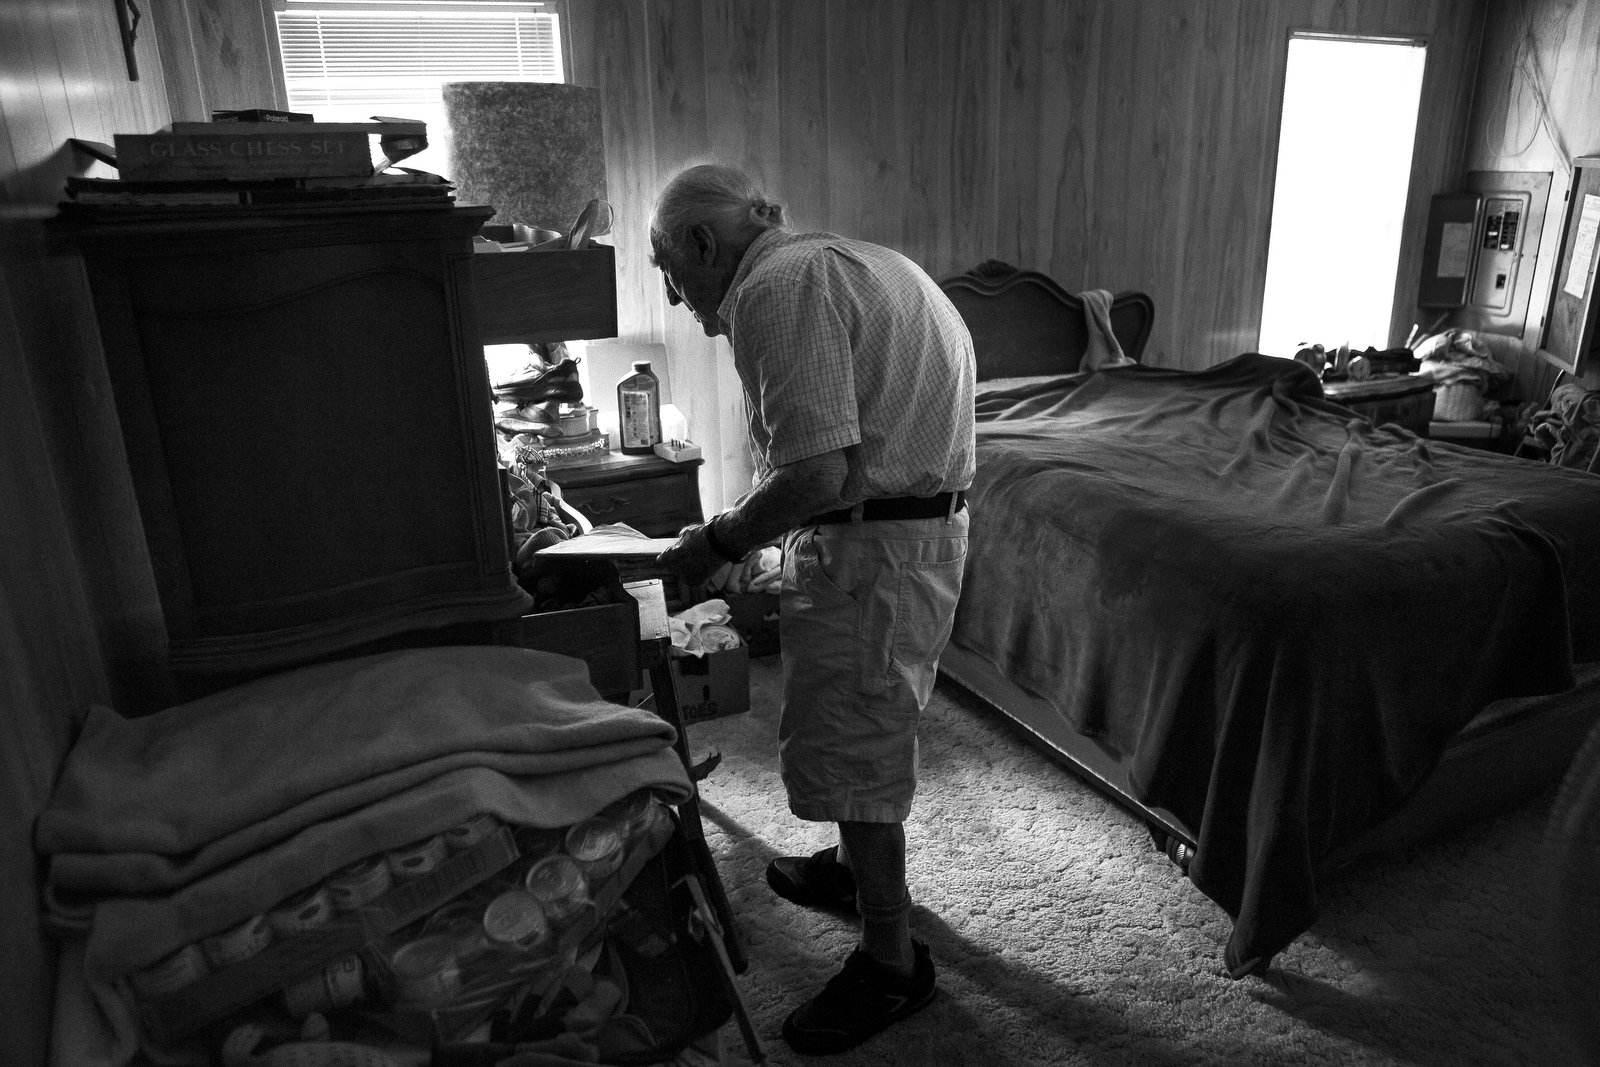  Charles Asaro, 98, stands in the bedroom of his home. He has lost much of his eyesight and although he fell into a hole in the floor of his bathroom, he would prefer to continue to live independently. 